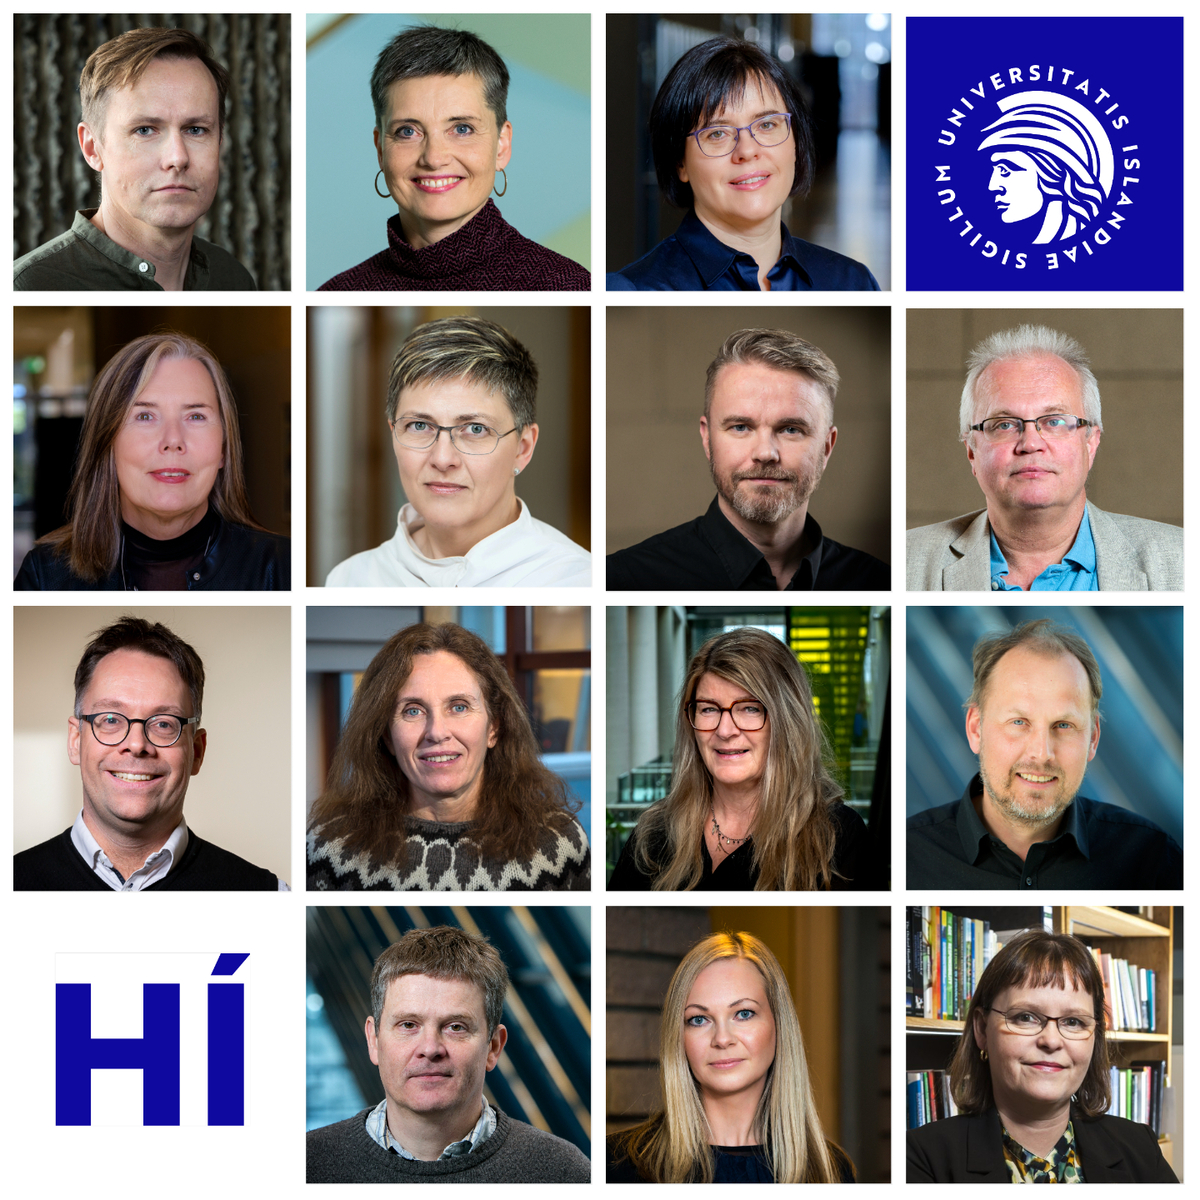 Thirteen new heads of faculty took office at the University of Iceland on 1 July as well as a new dean of the School of Health Sciences. Two University faculties take up a new name.